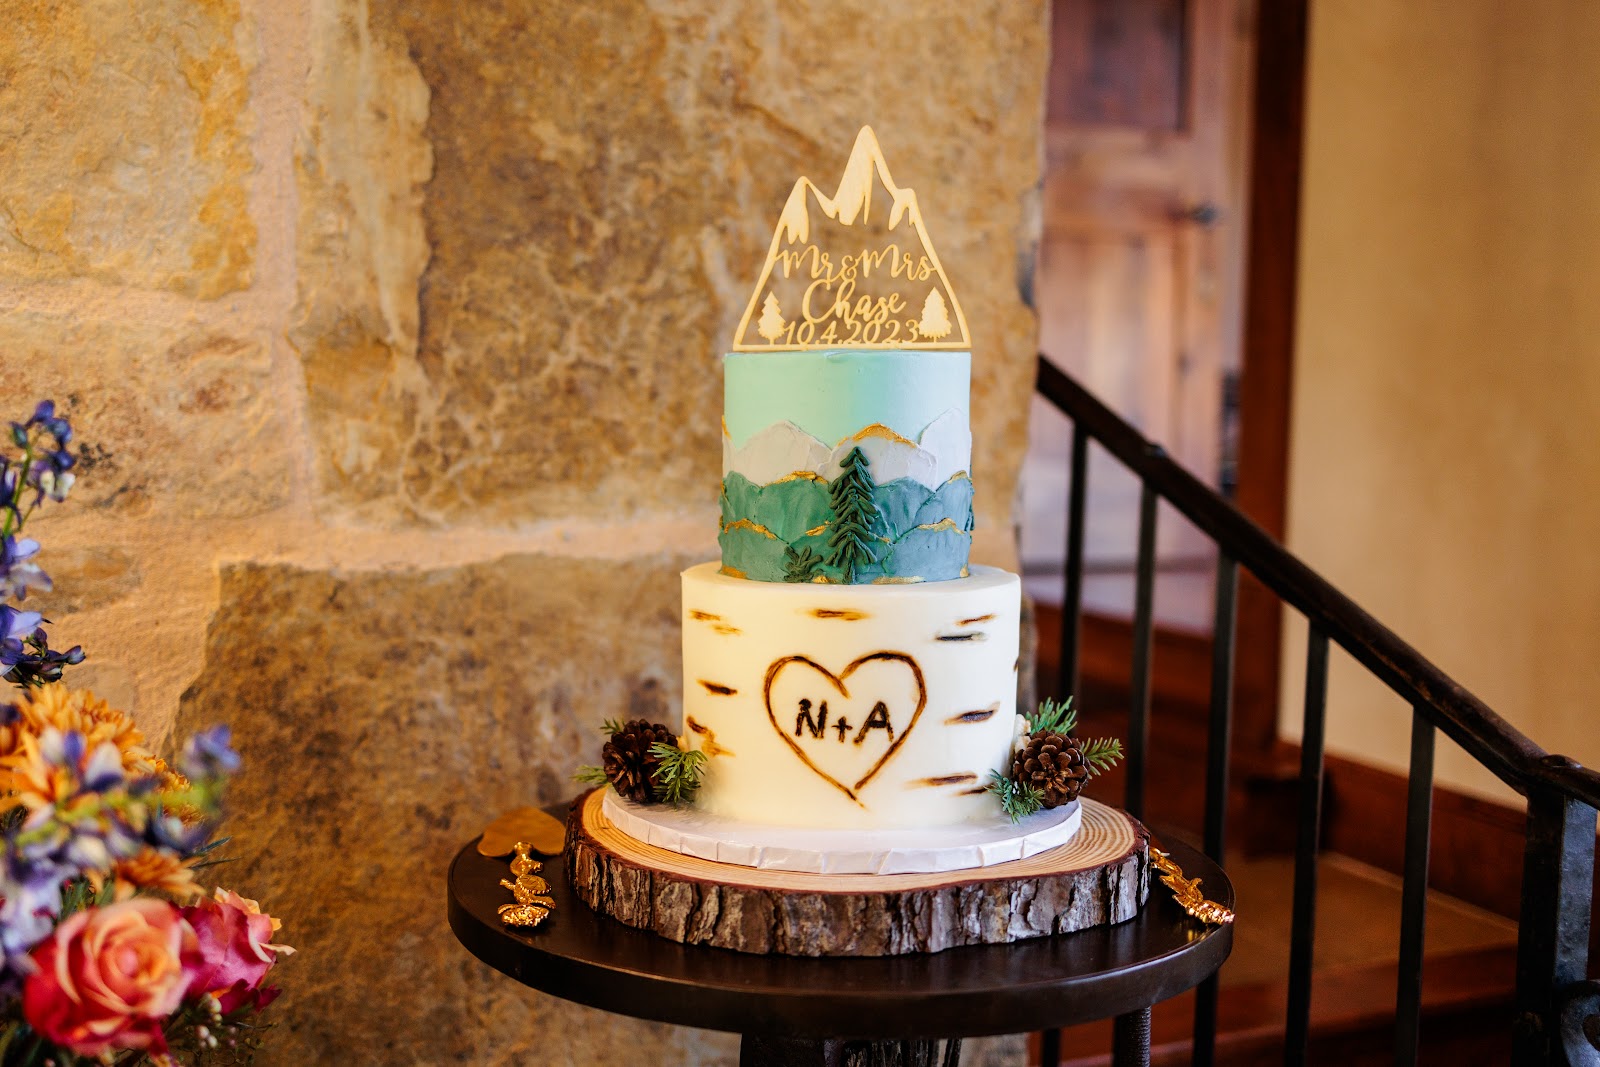 Two-tiered adventurous wedding cake with mountain and sky icing art on the upper tier, a heart with initials 'N+A' on the lower tier, and a personalized 'Mr & Mrs Chase' topper, displayed on a wood slice stand amidst flowers and pine cones.